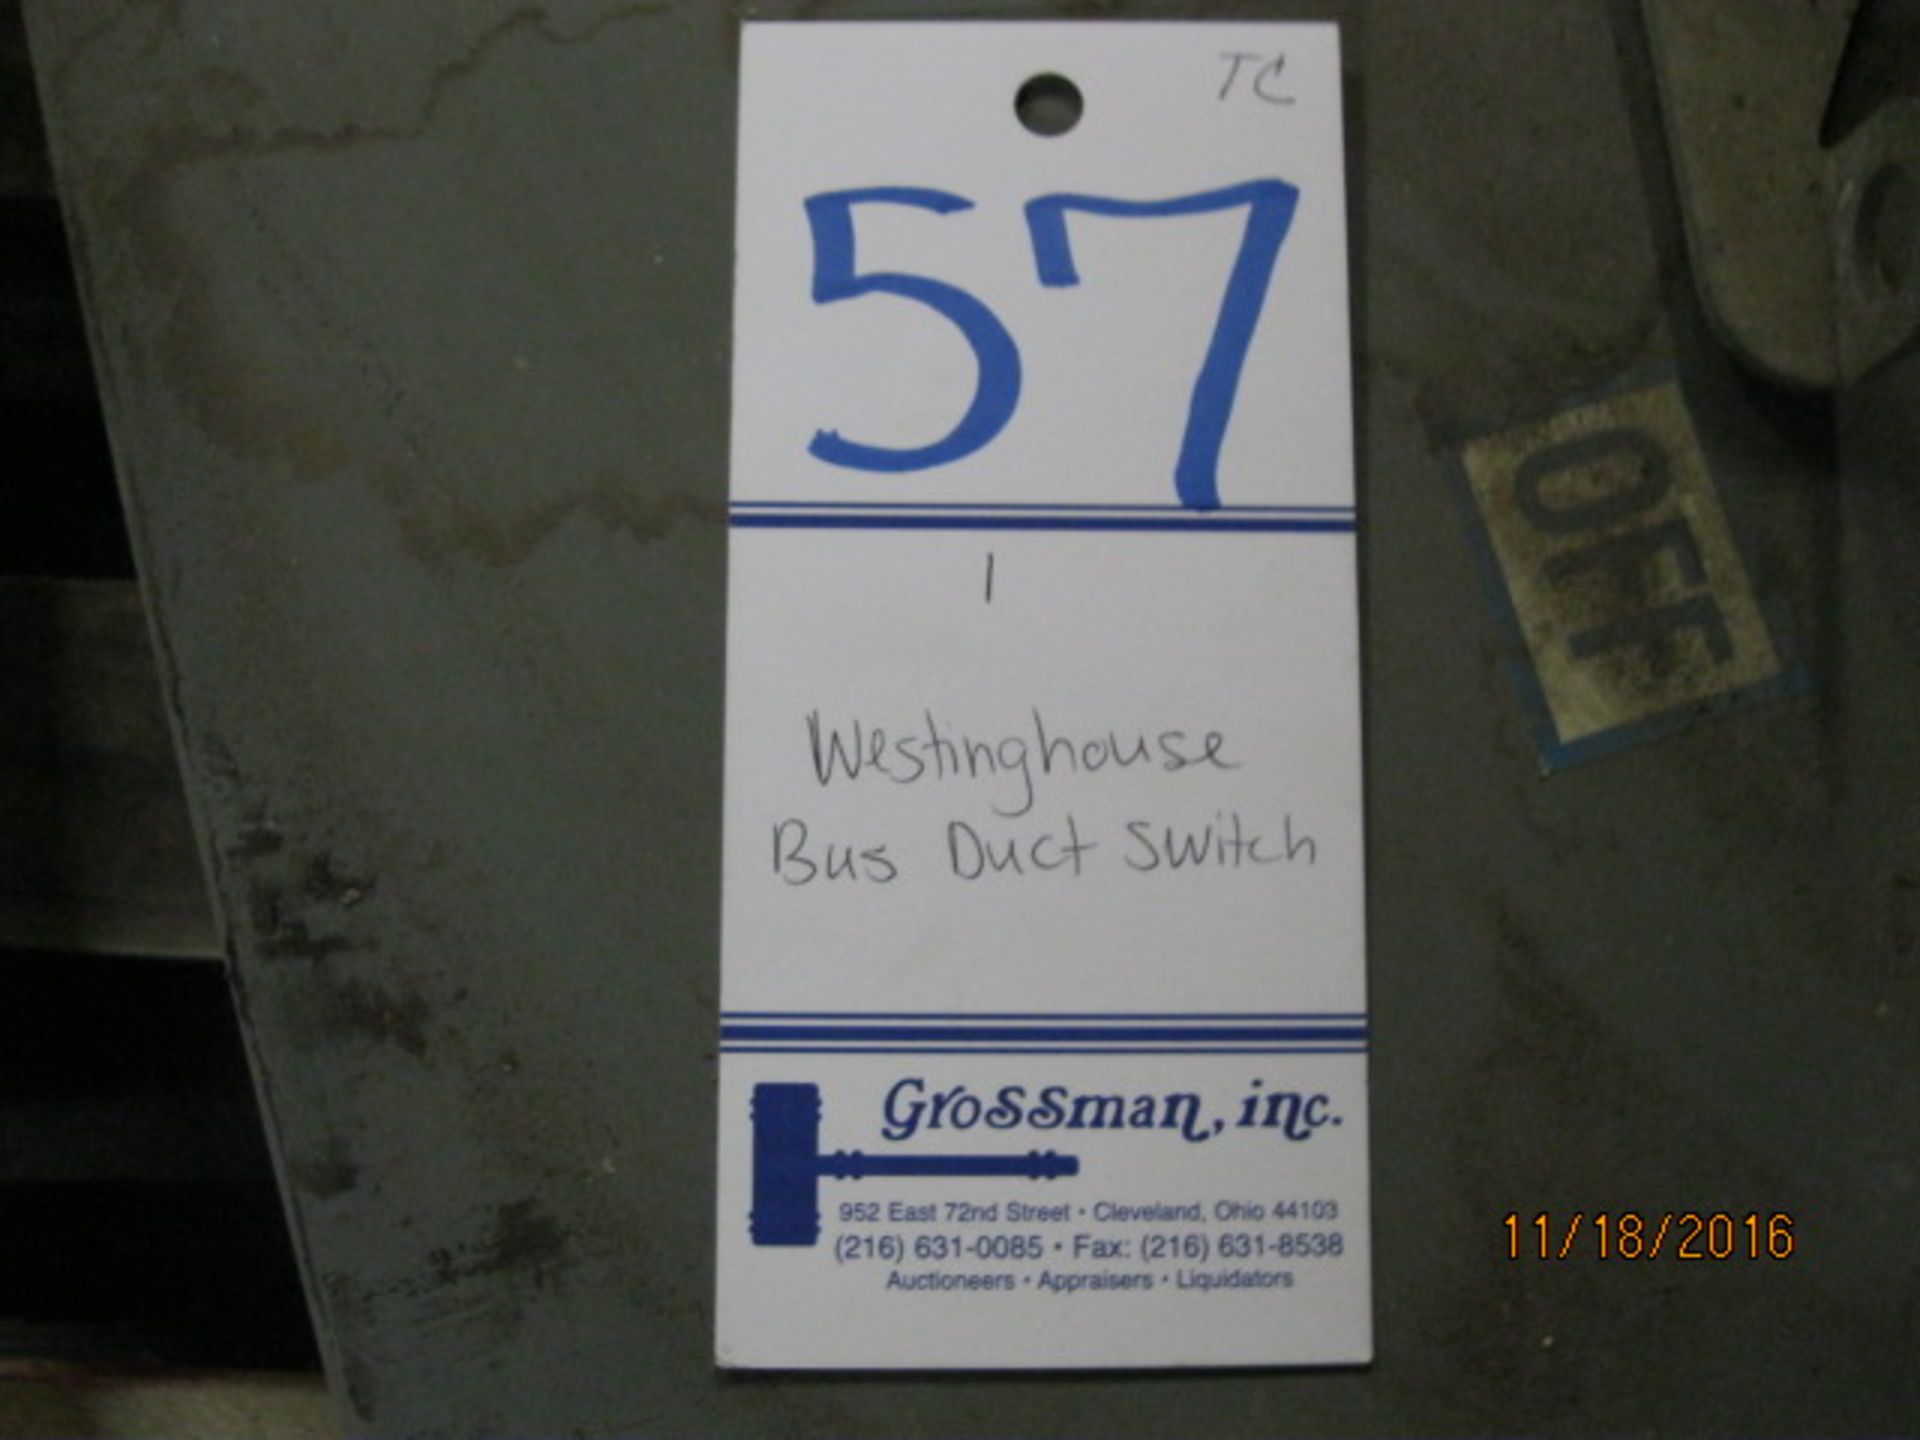 Westinghouse bus duct switch - Image 4 of 4